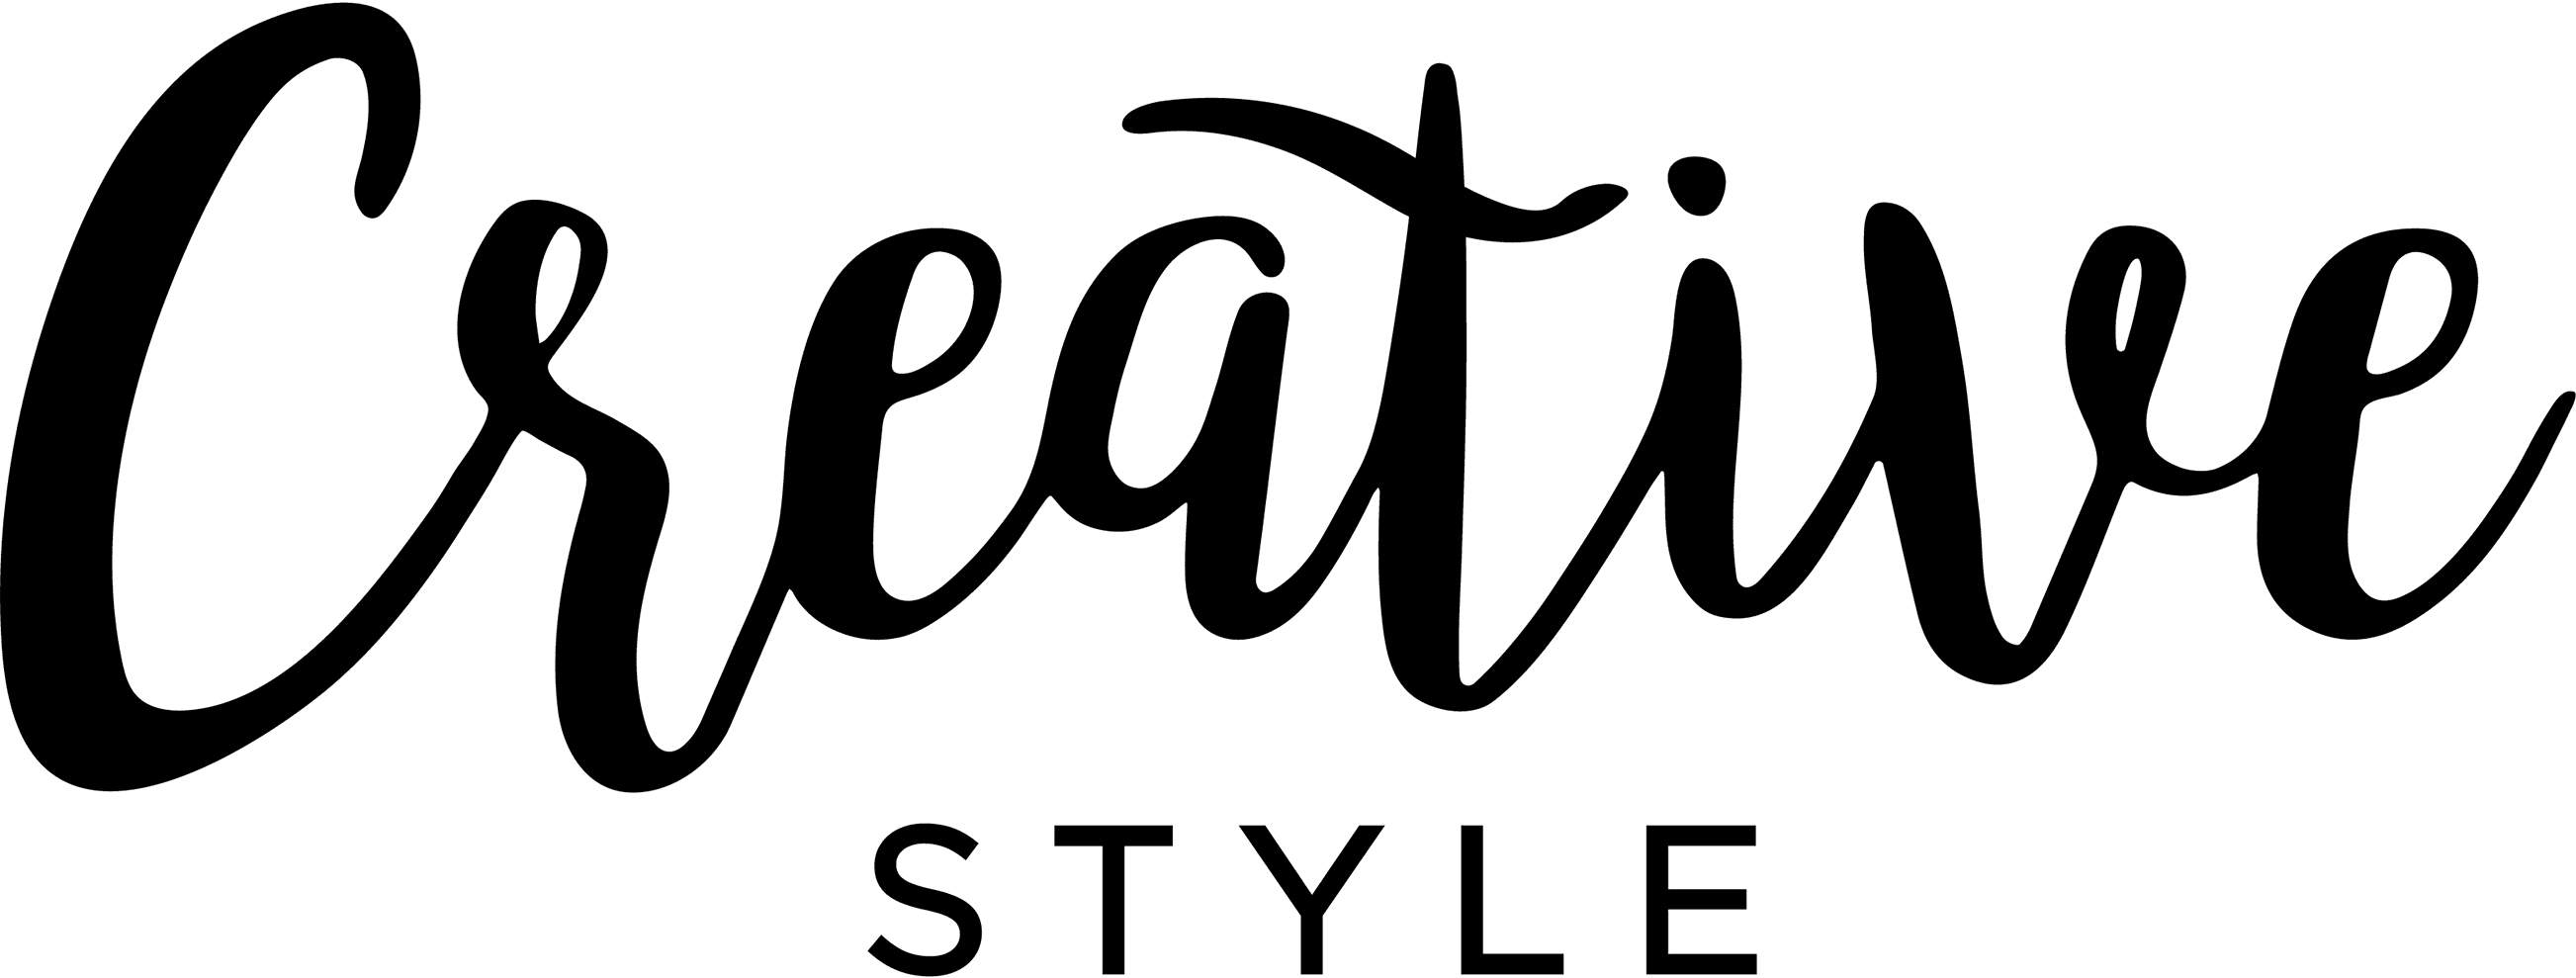 Creative Style | Fashion Online Store